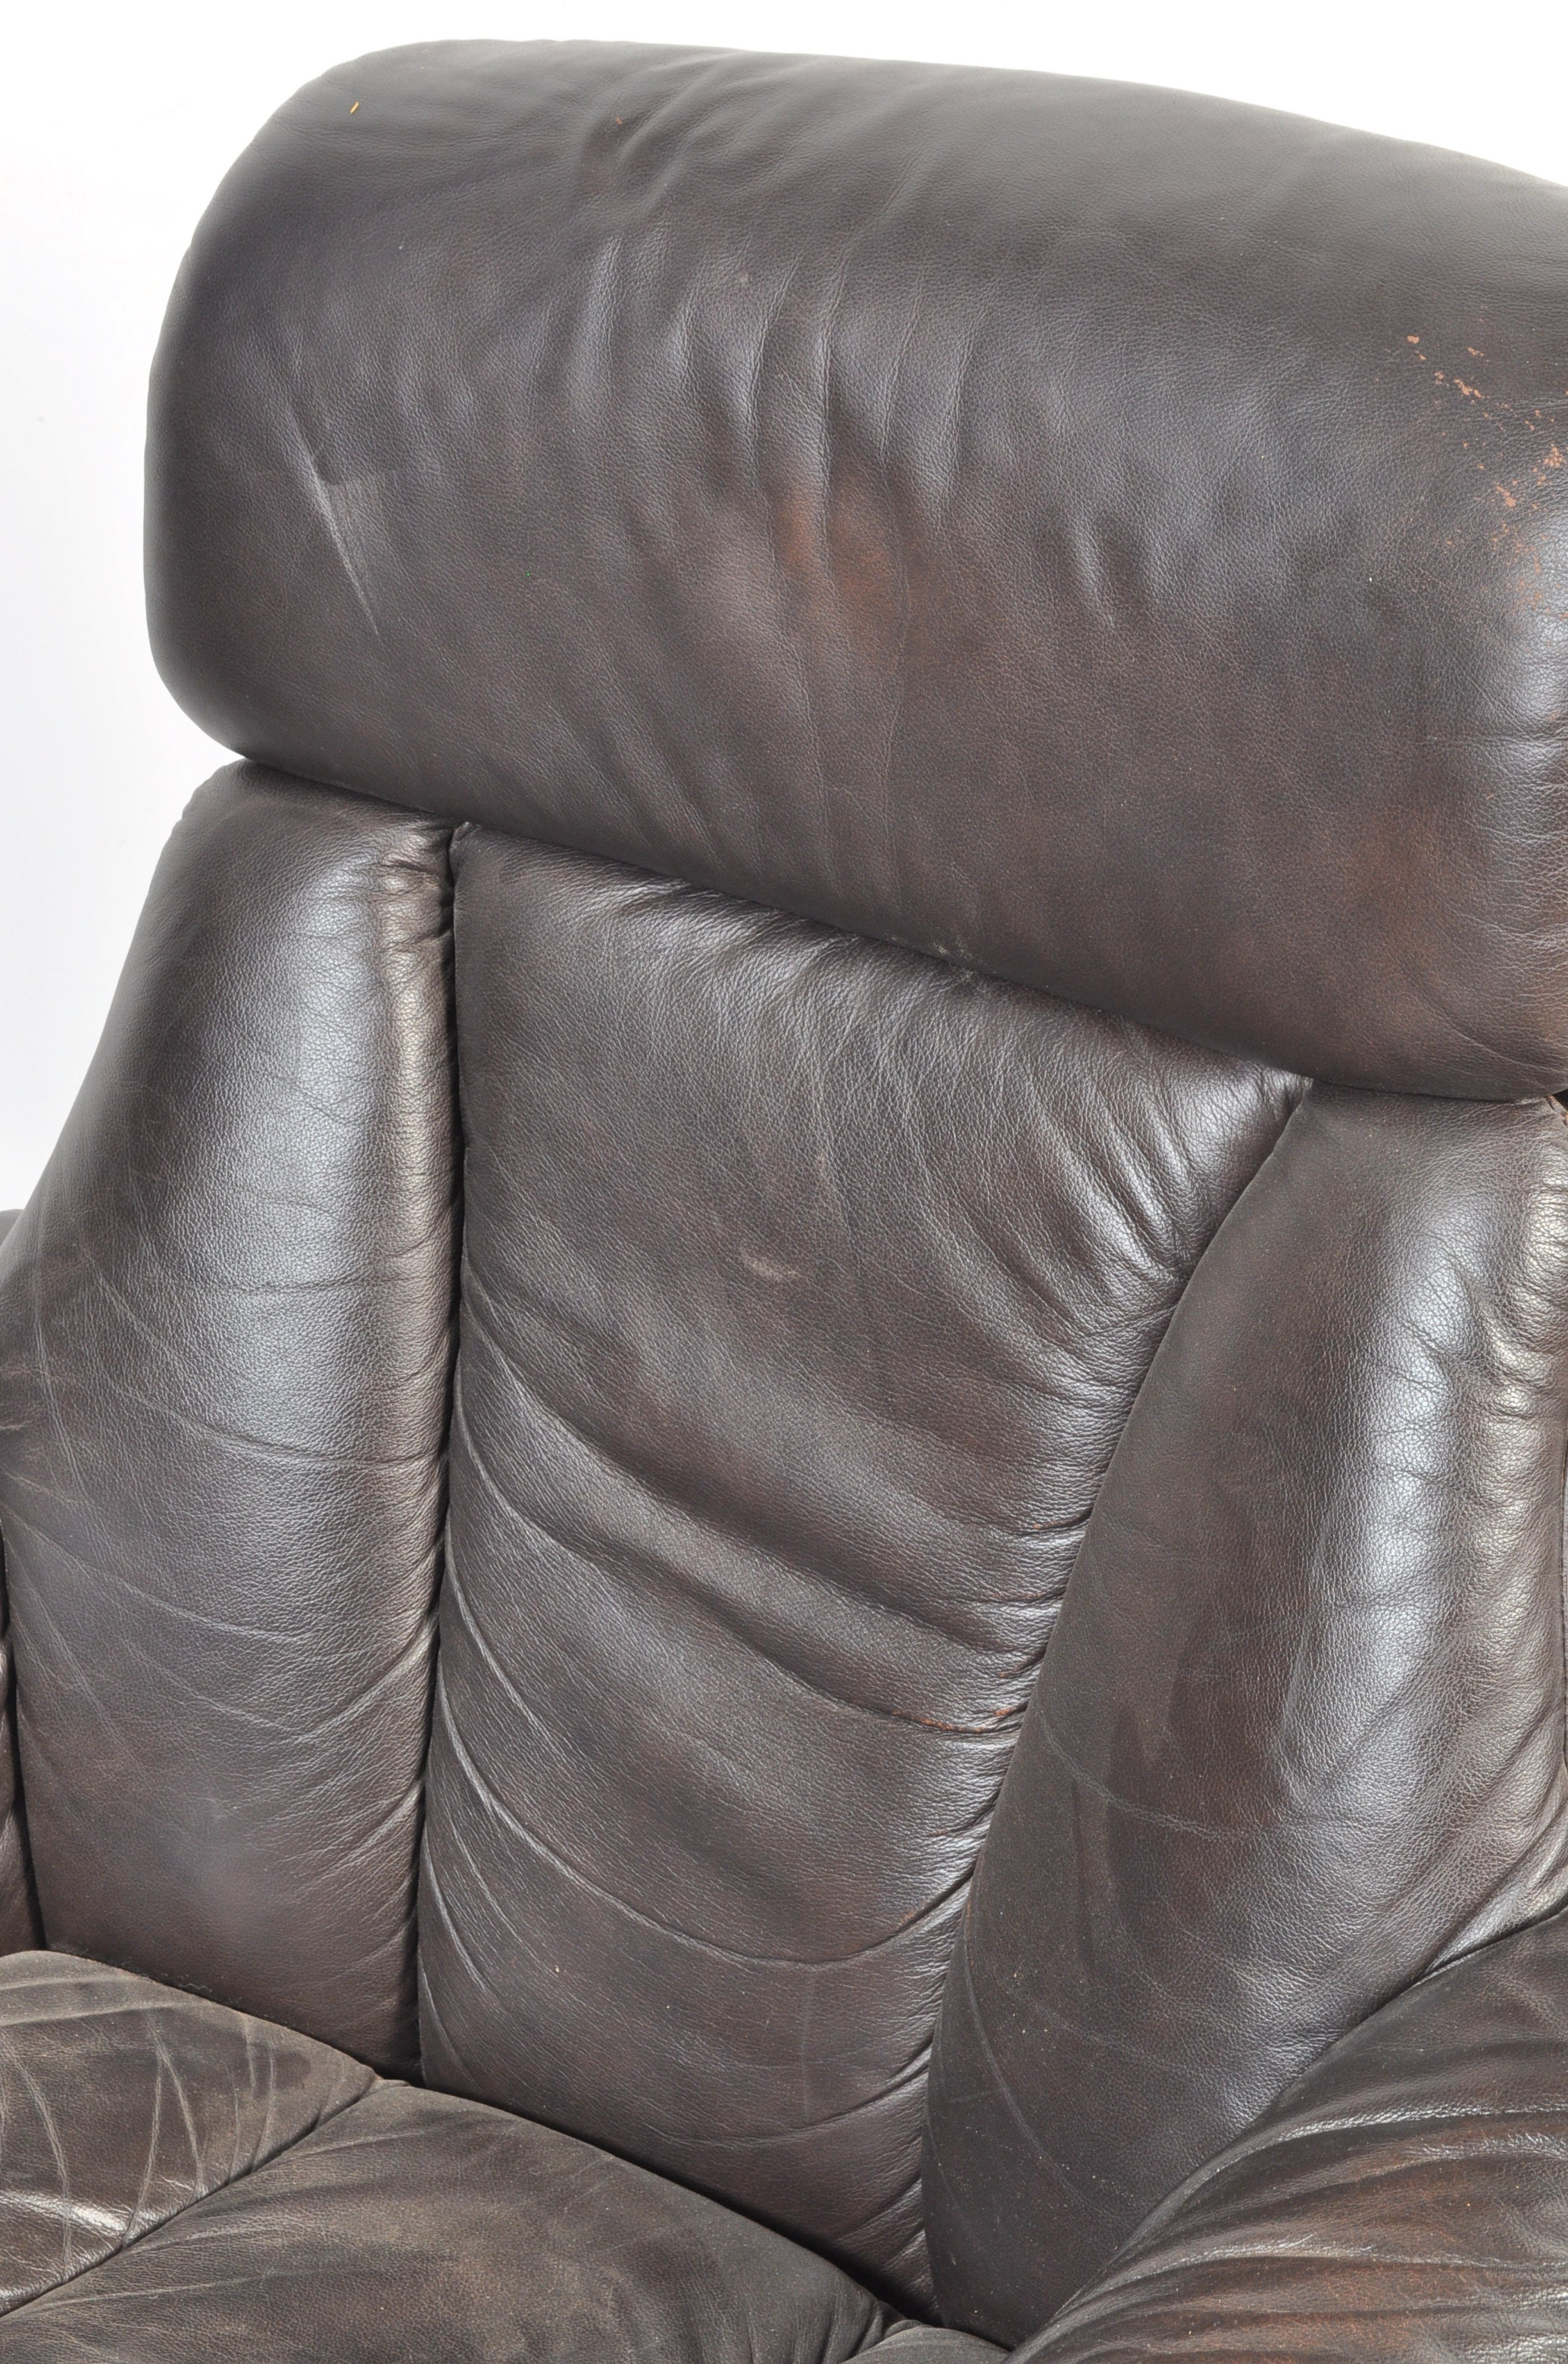 CONTEMPORARY STRESSLESS STYLE RECLINING ARMCHAIR - Image 4 of 6